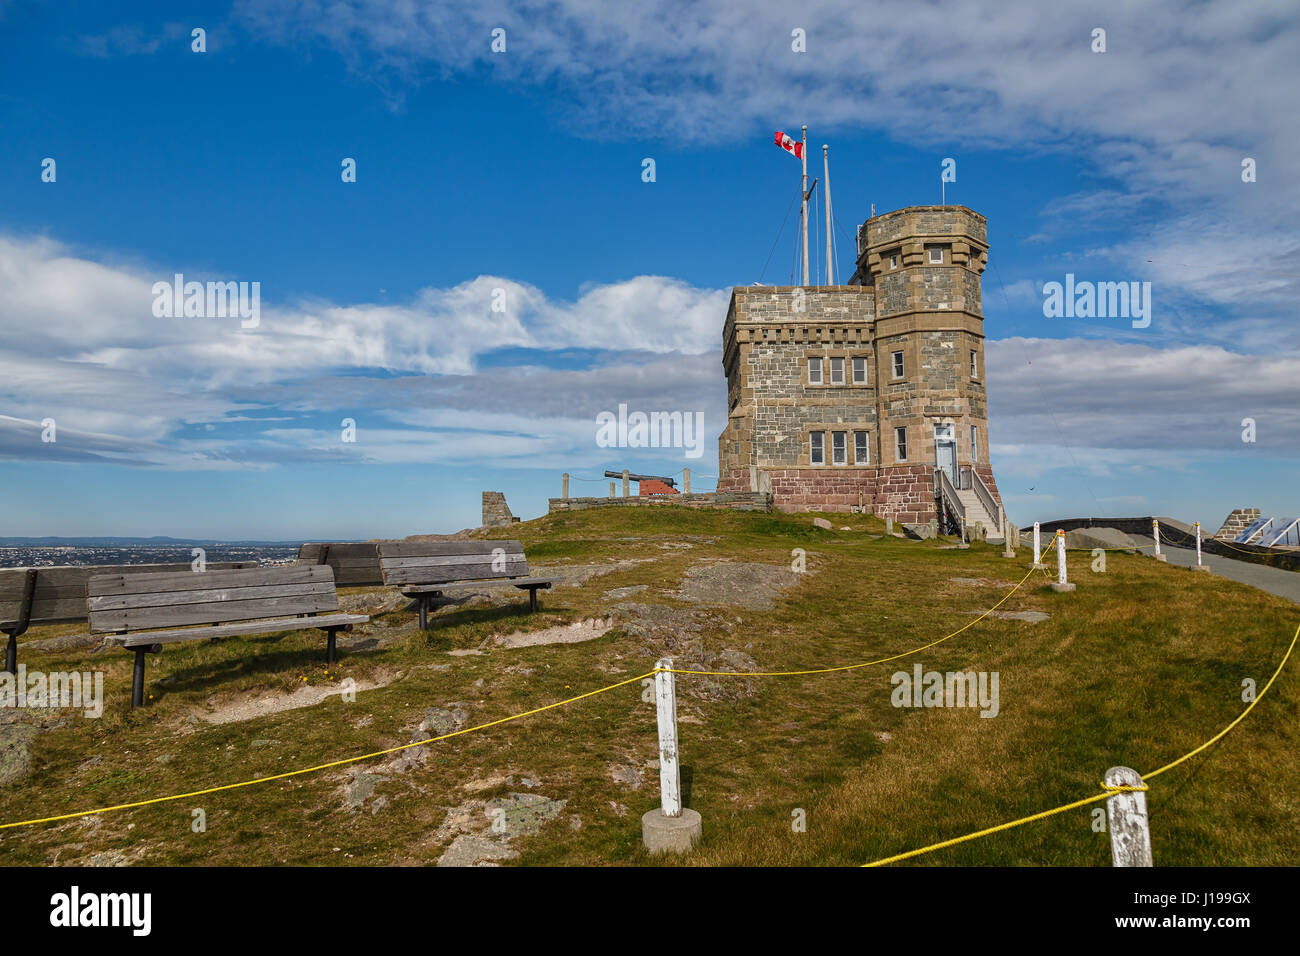 Cabot Tower on Signal Hill, St. John's, Newfoundland, Canada Stock Photo